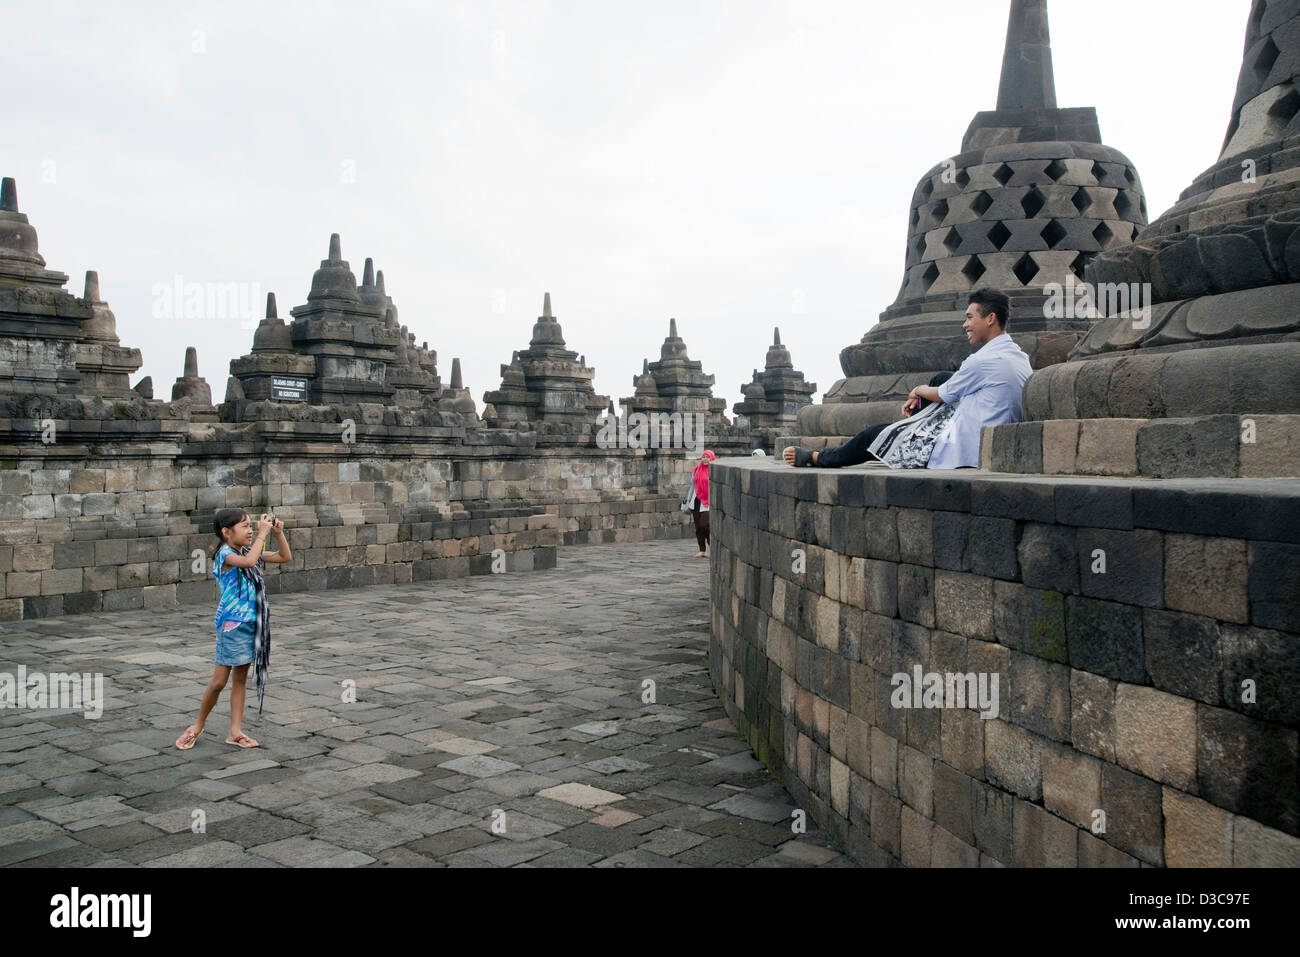 A small child takes a picture of her father at the Borobudur Buddhist Temple in Java, Indonesia Stock Photo